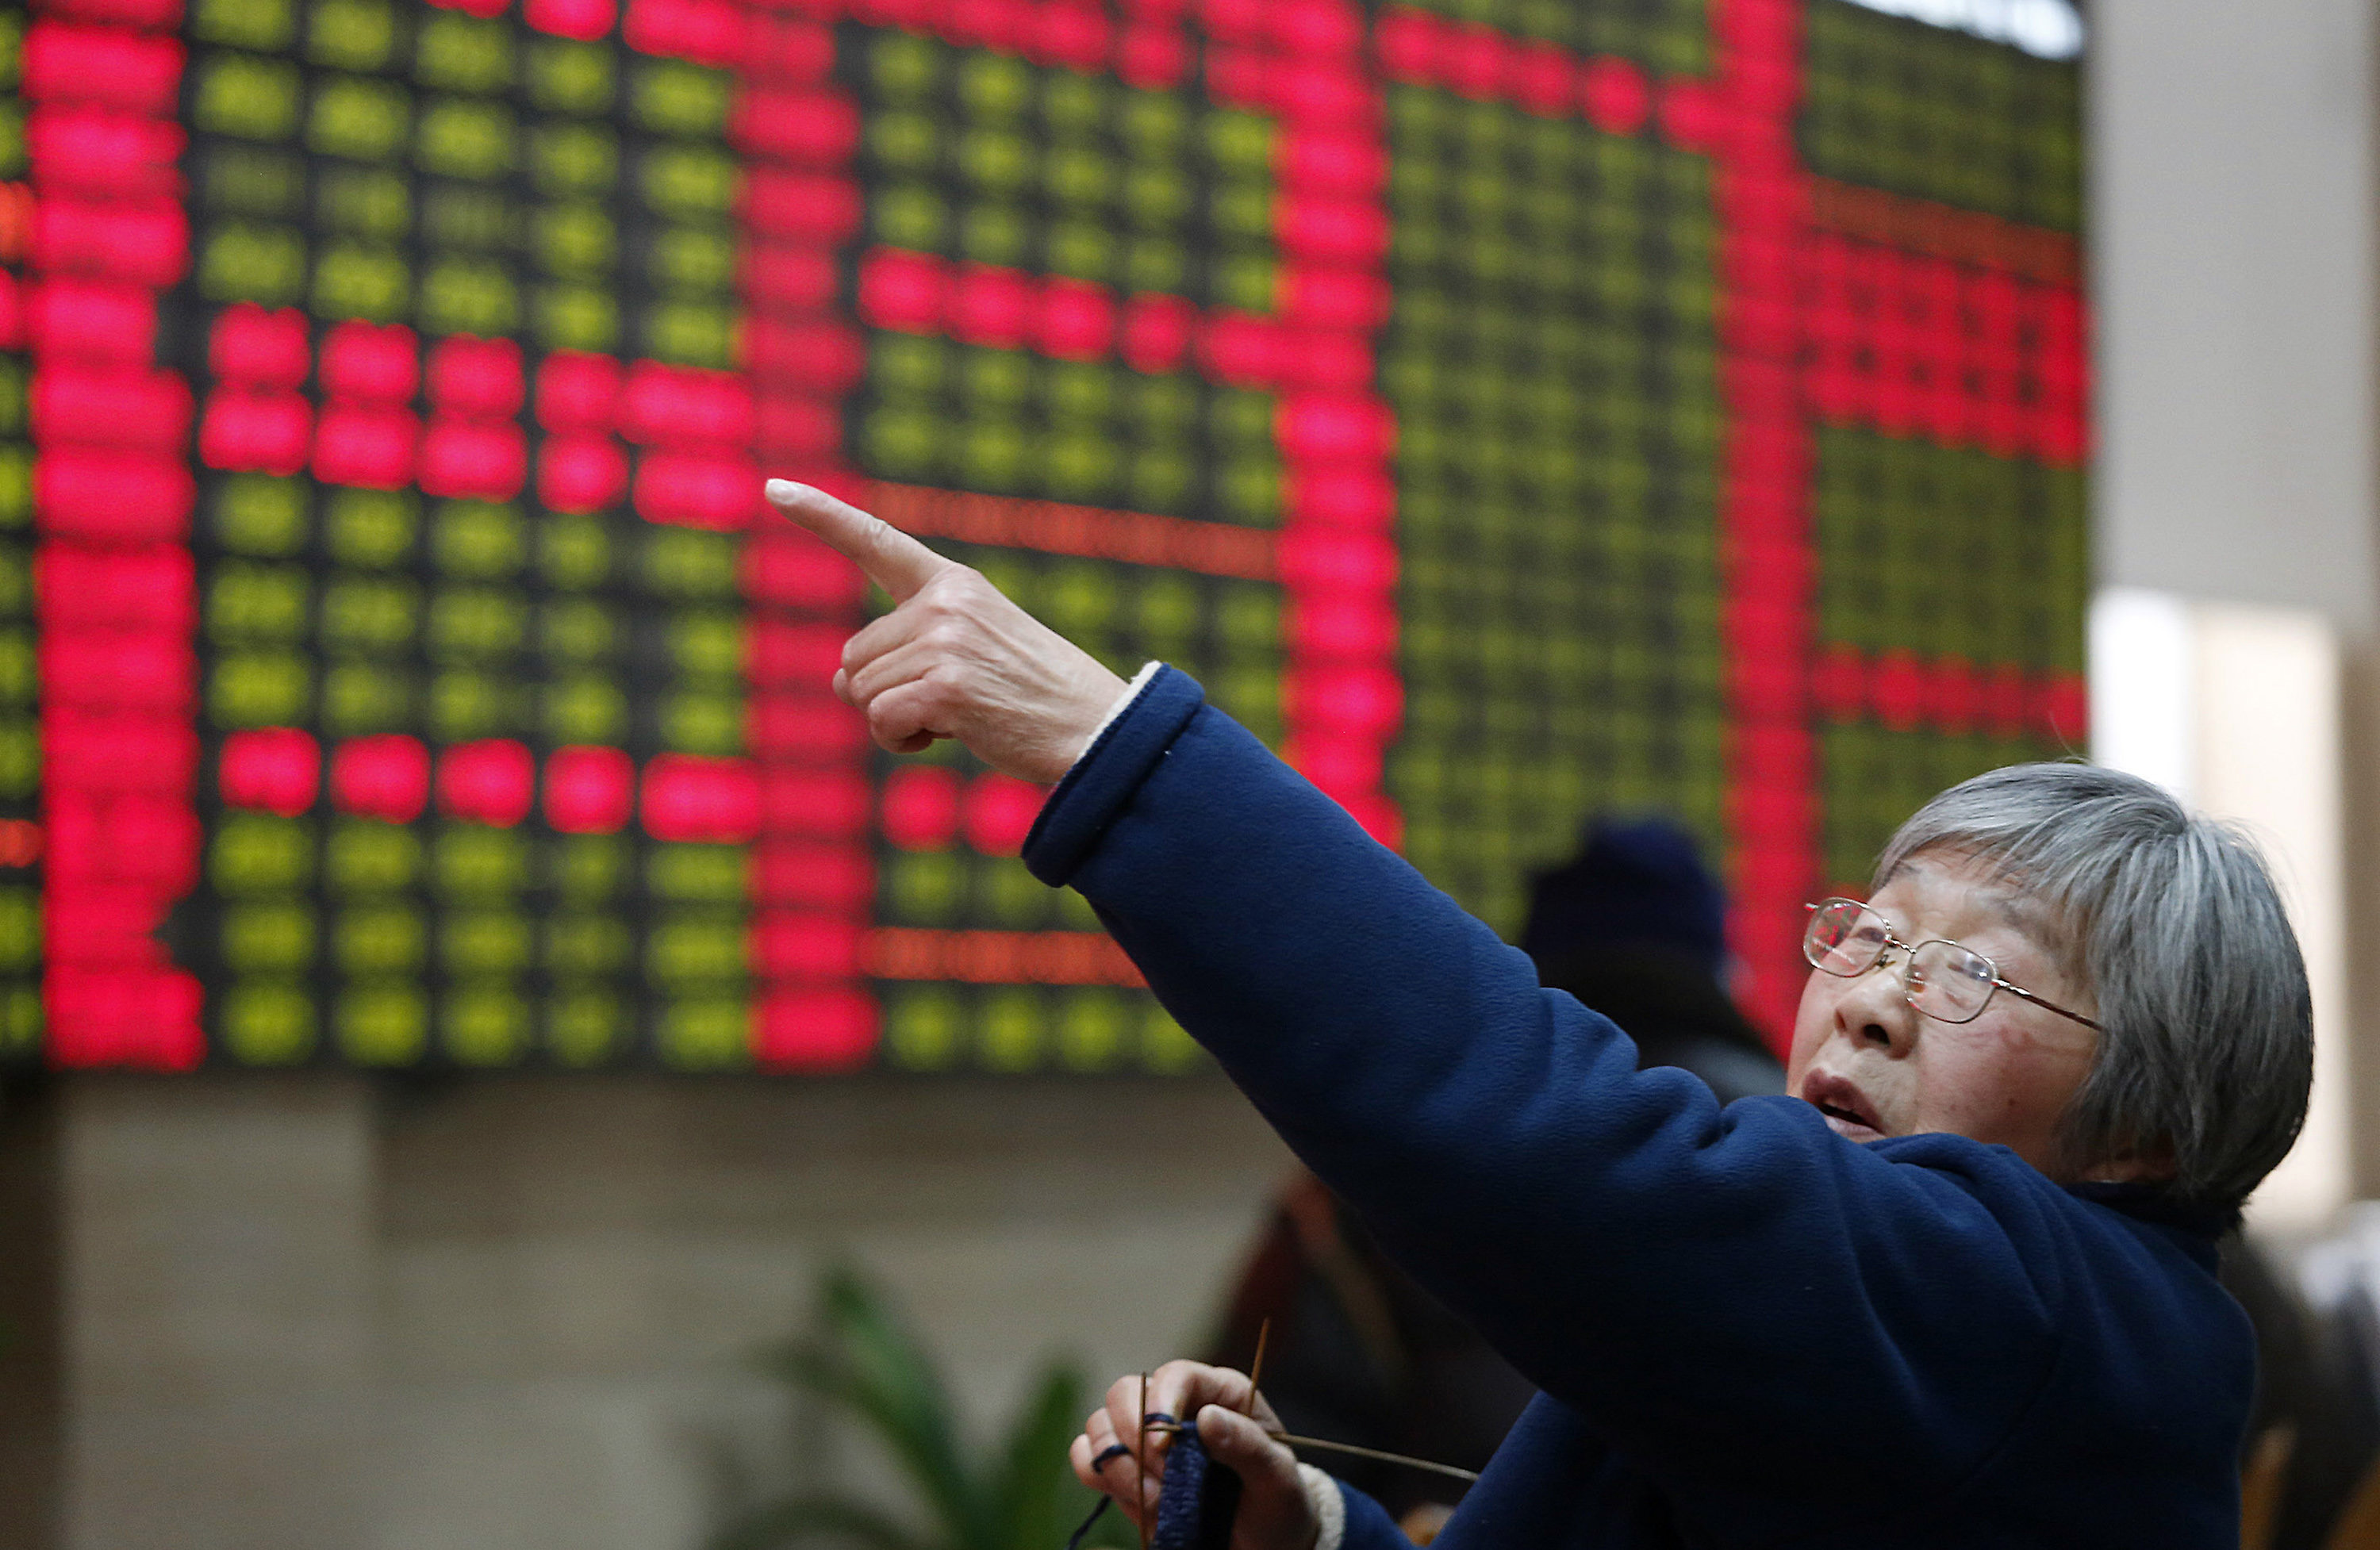 An investor gestures in front of the stock price monitor at a private securities company in Shanghai on December 26, 2013. Photo: AP